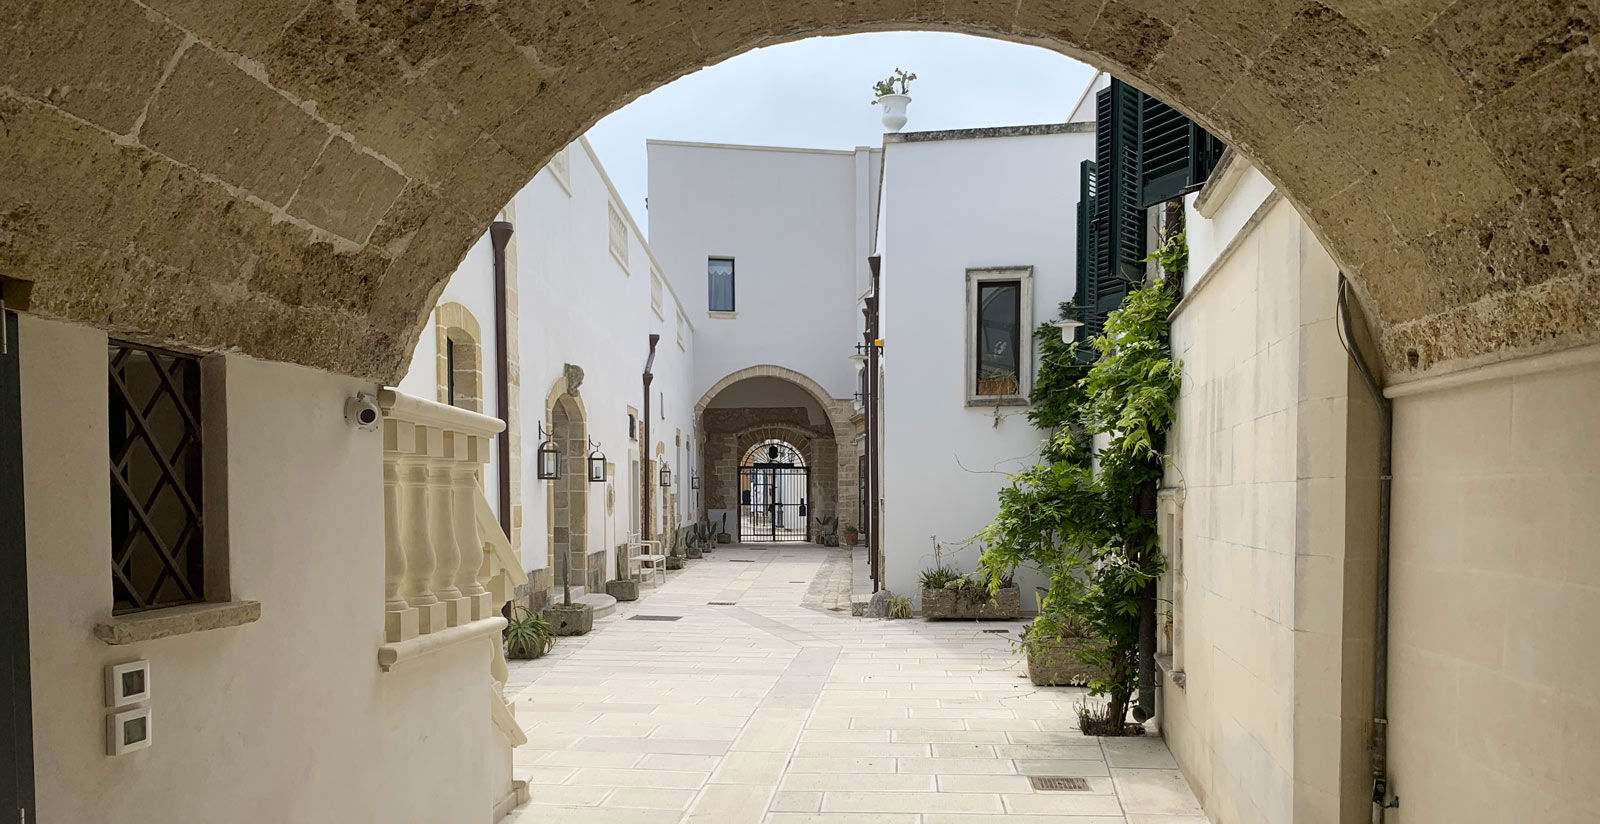 Hotel with meeting rooms in Puglia Italy 4